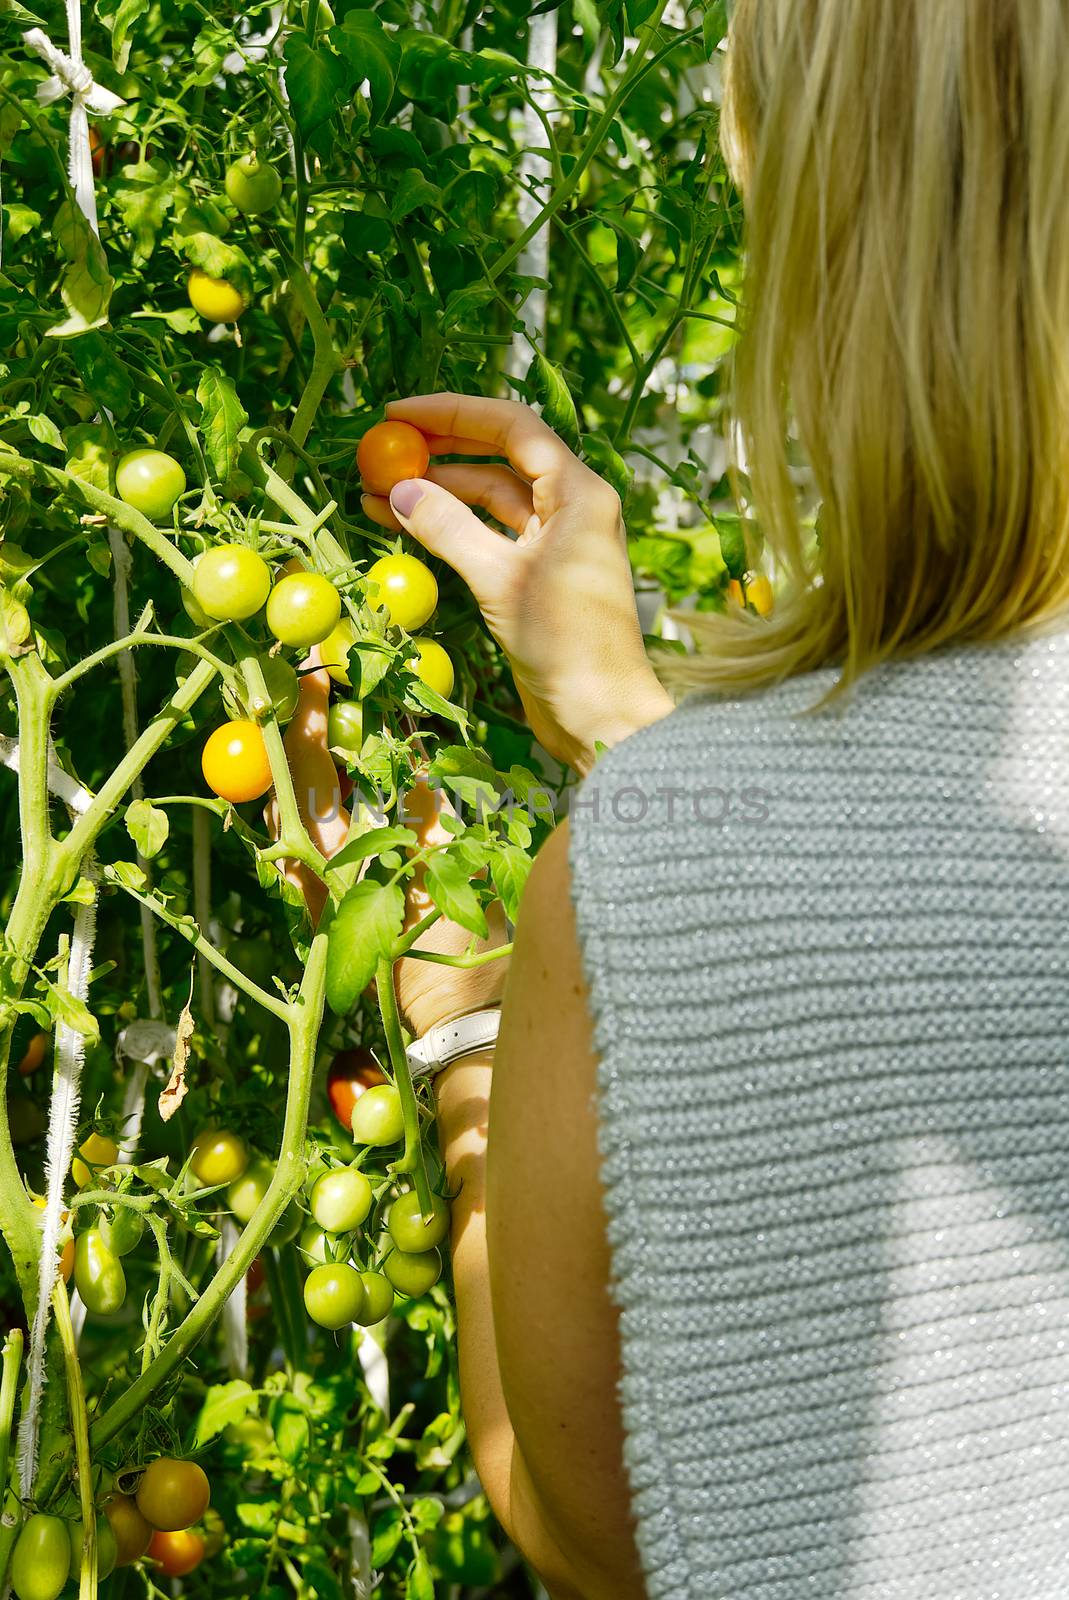 the gardener examines the quality of the yellow cherry tomatoes. Ripening cherry tomatoes in a greenhouse. Home gardening concept. by PhotoTime